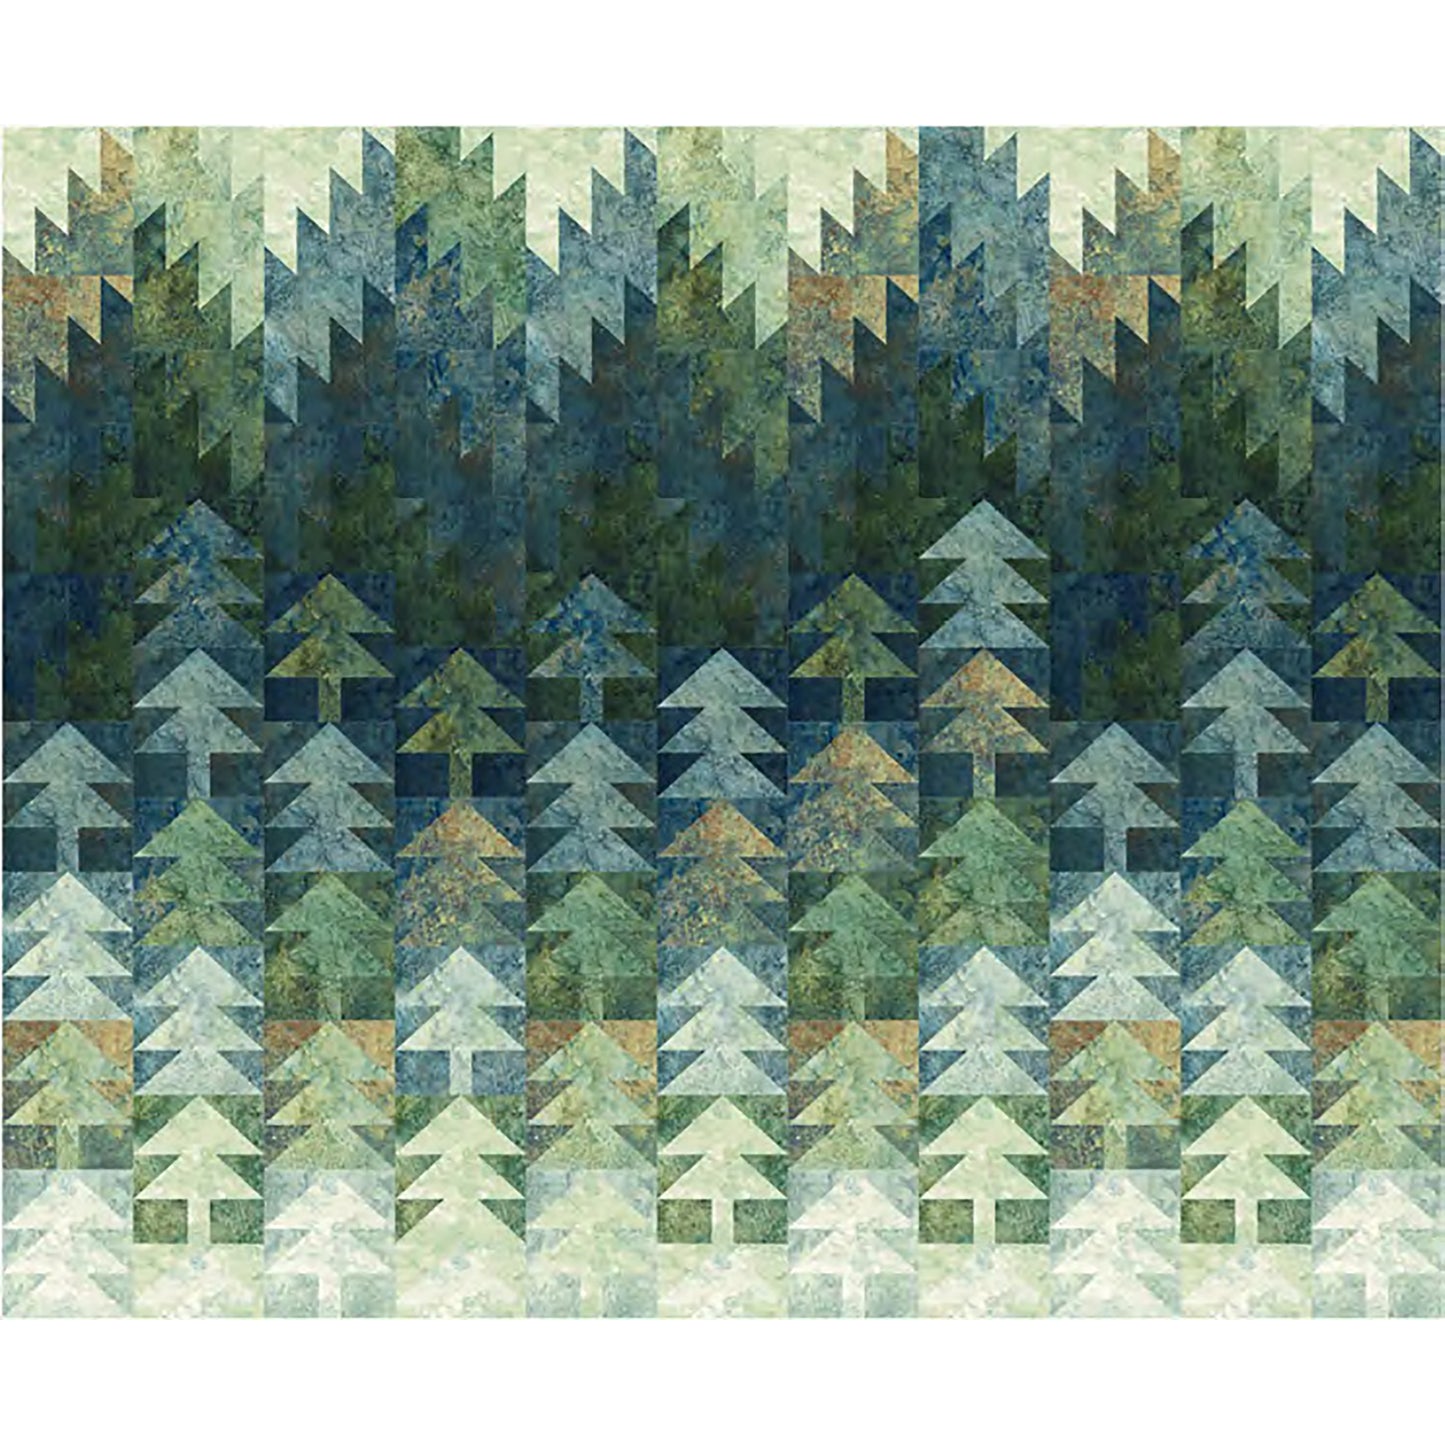 Misted Pines 2.0 Quilt Pattern PC-304 - Paper Pattern